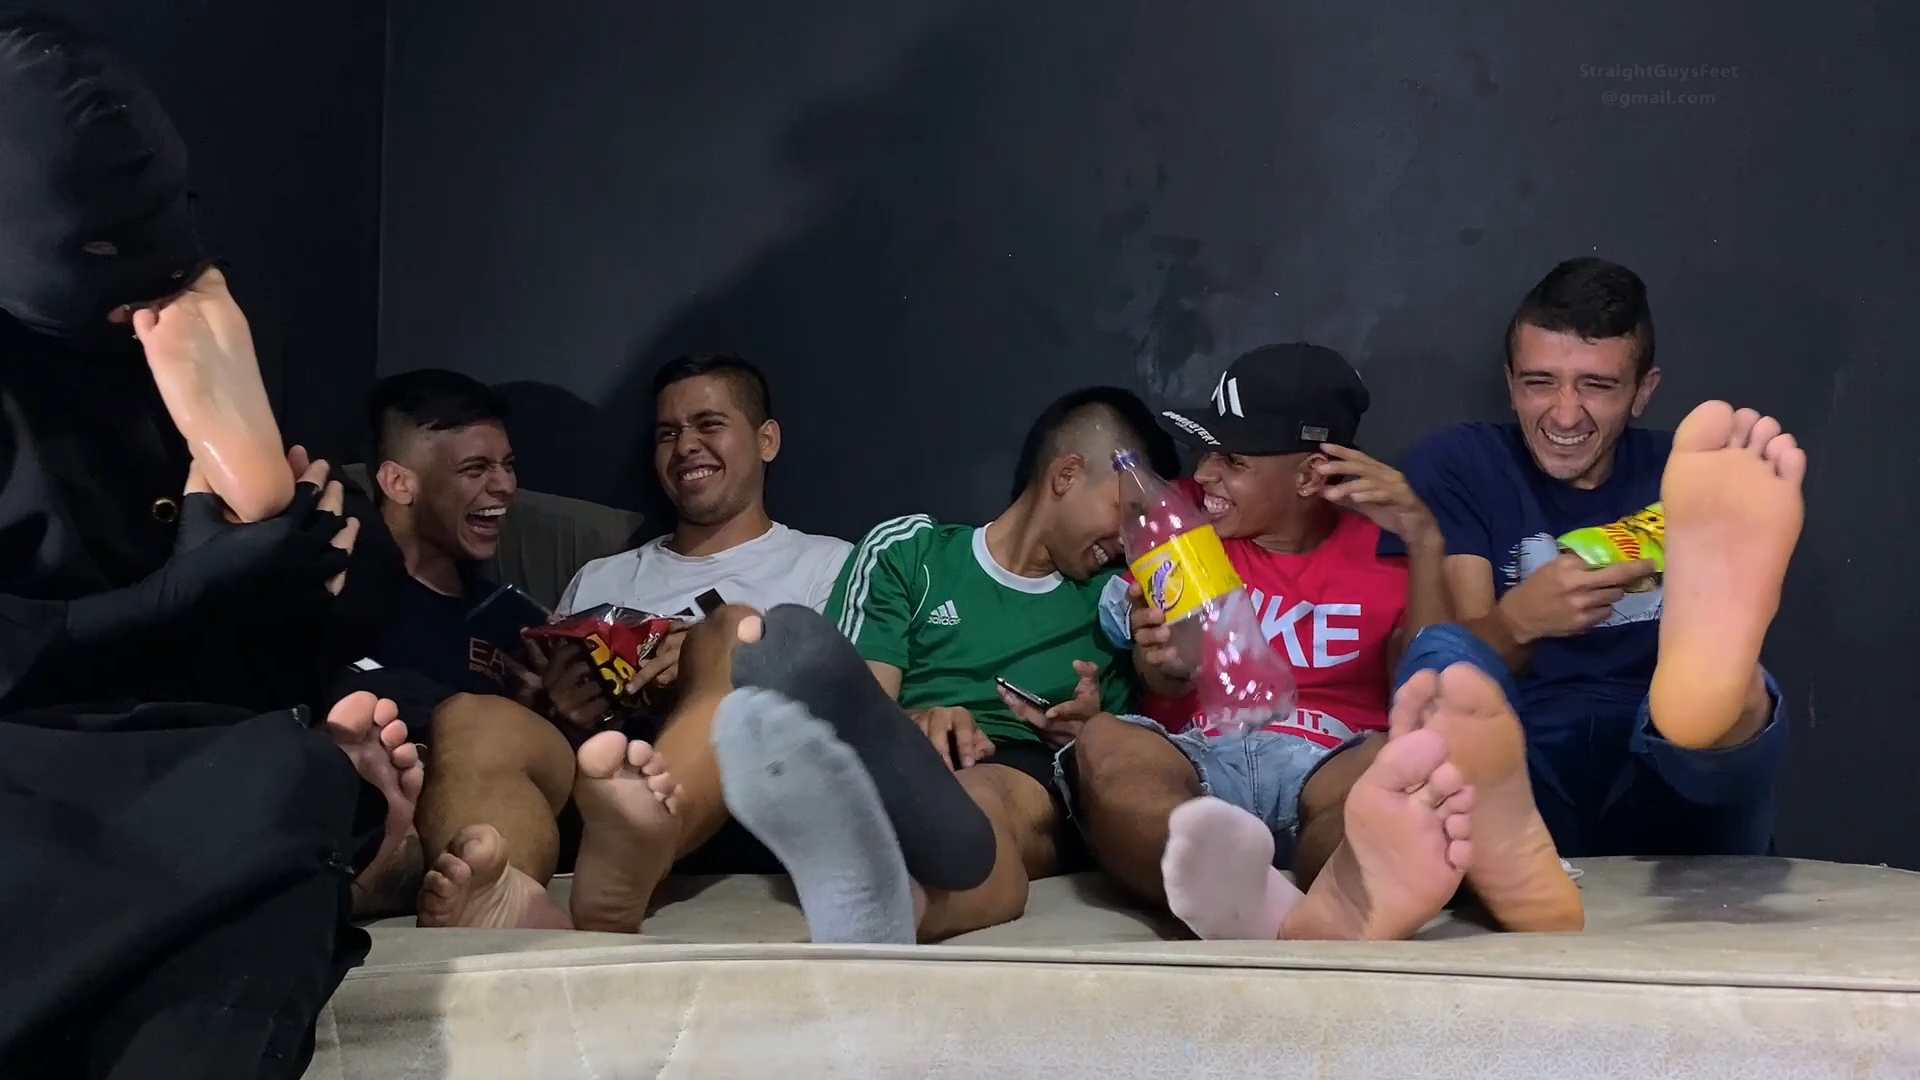 5 soccer players have their feet licked, one by one